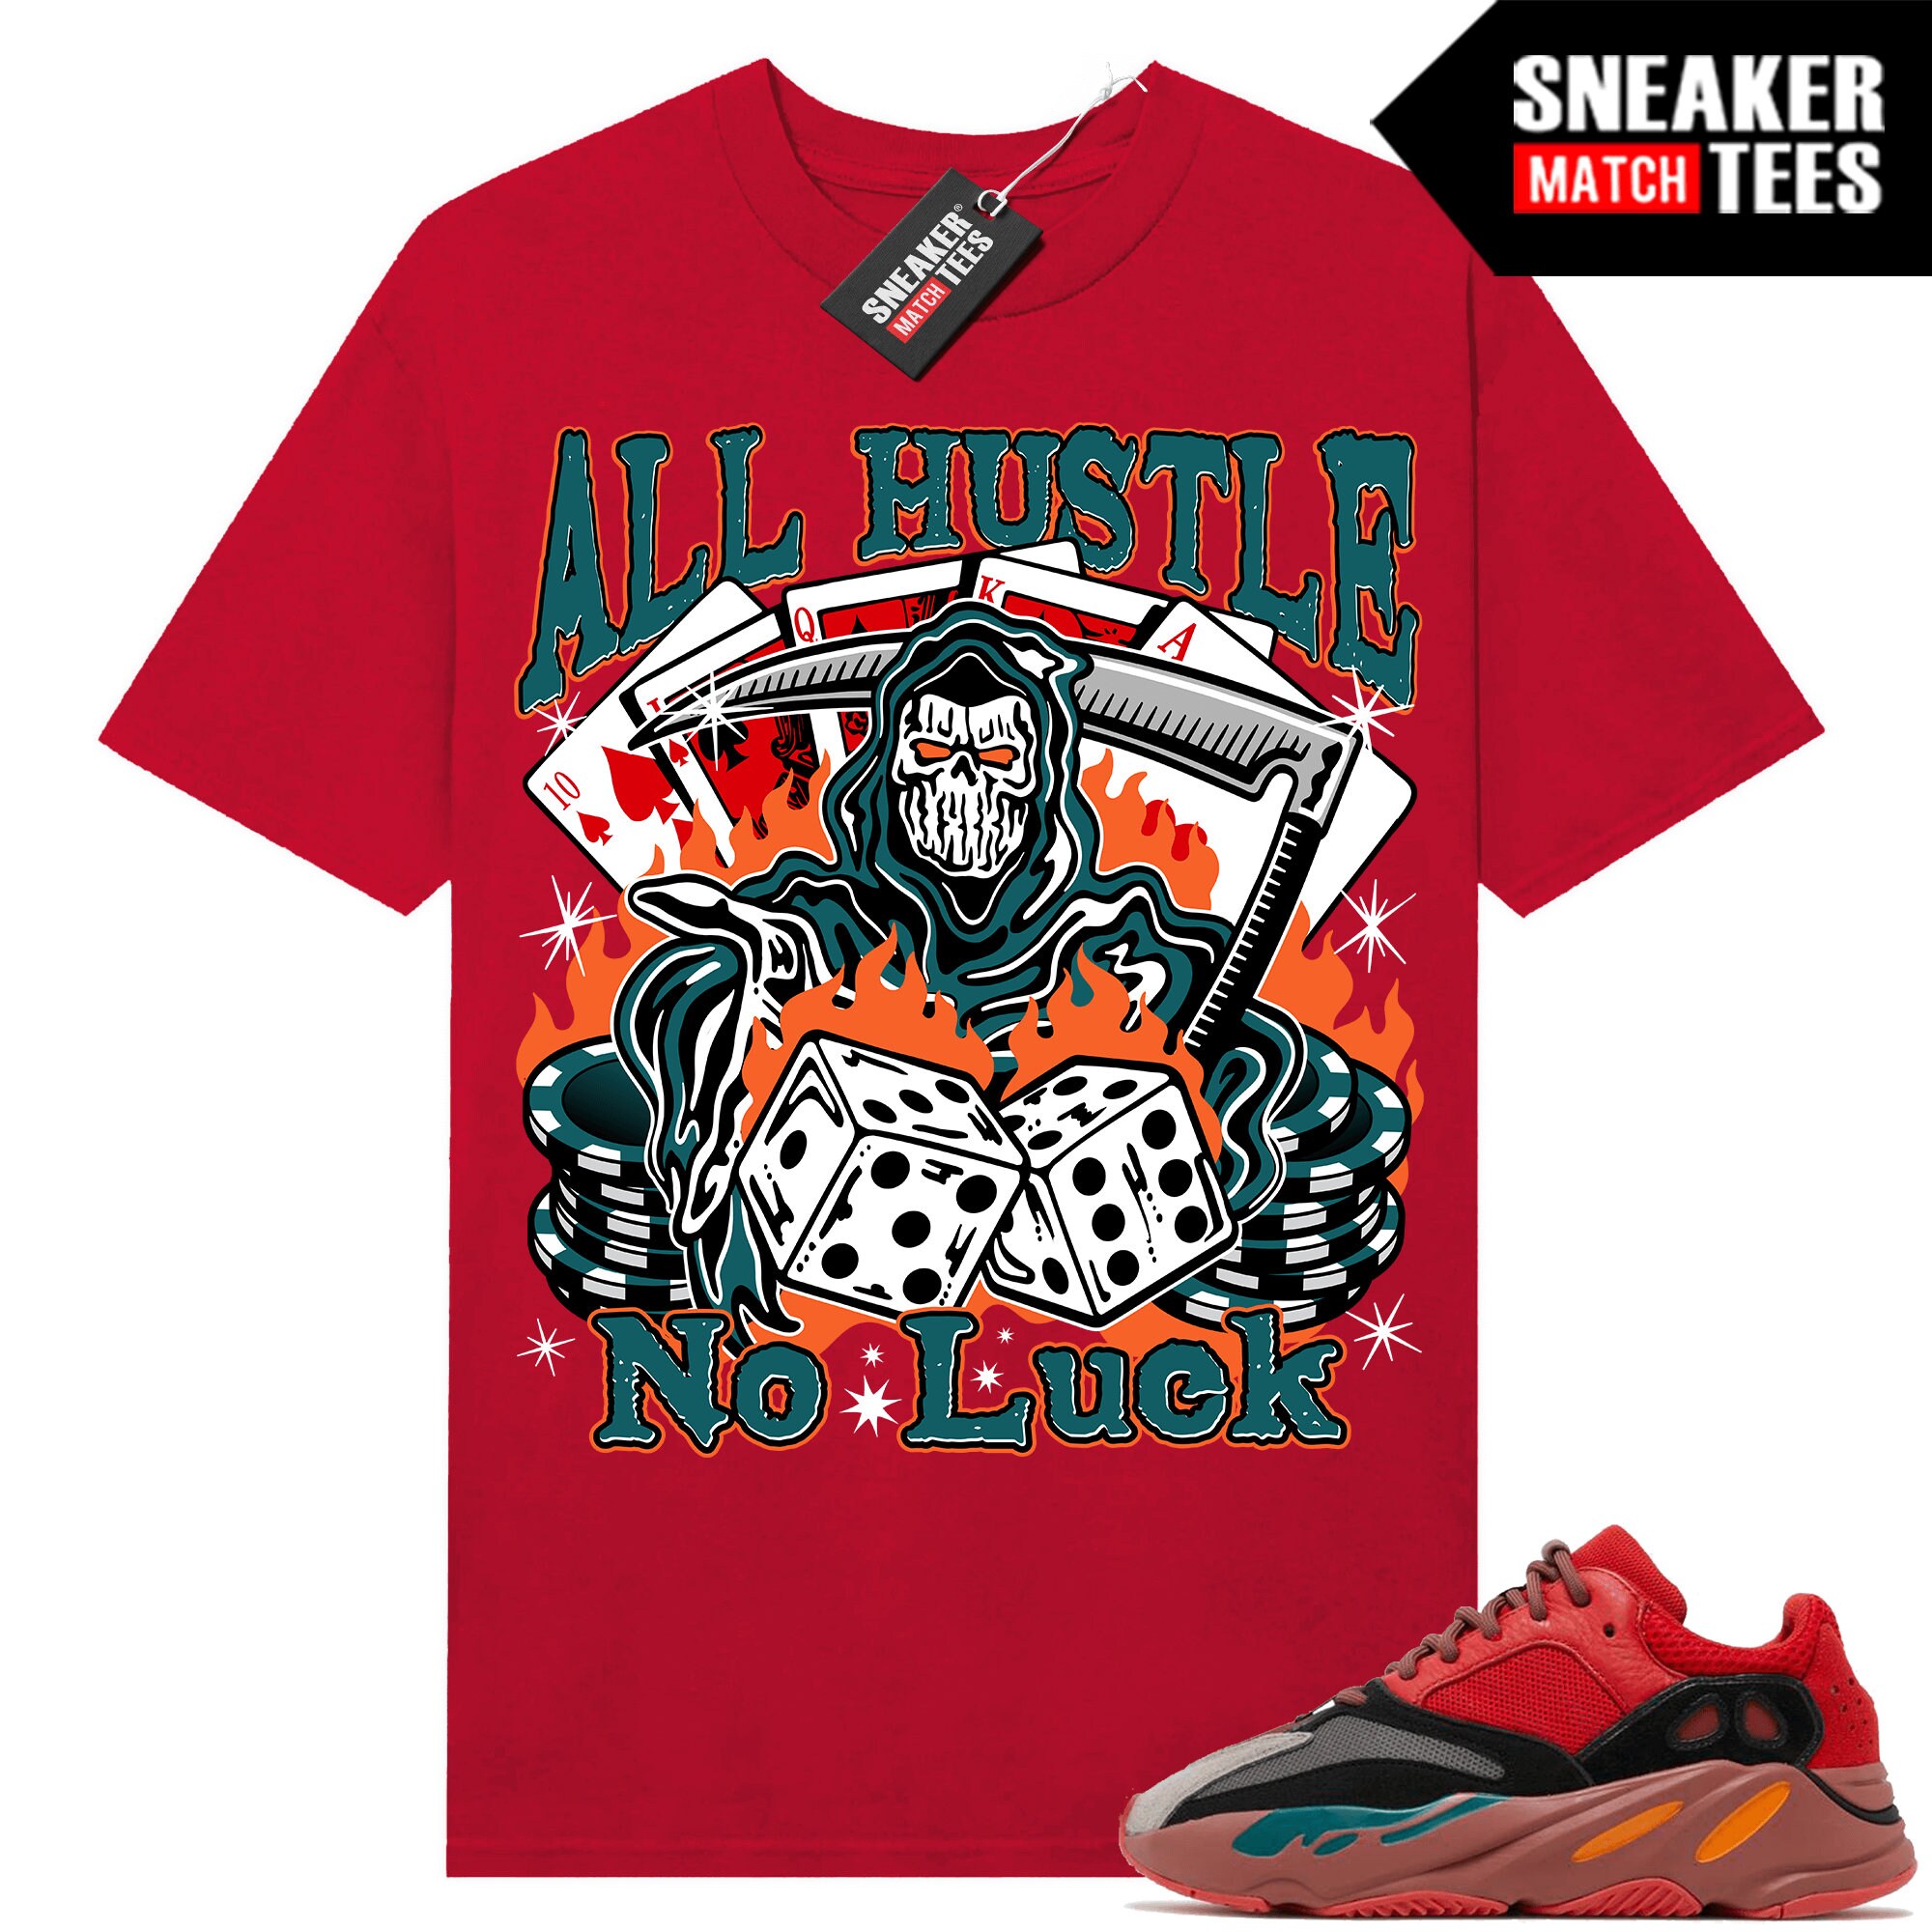 Yeezy 700 Hi-Res Red shirts to match Sneaker Match Tees Red "All Hustle No Luck"